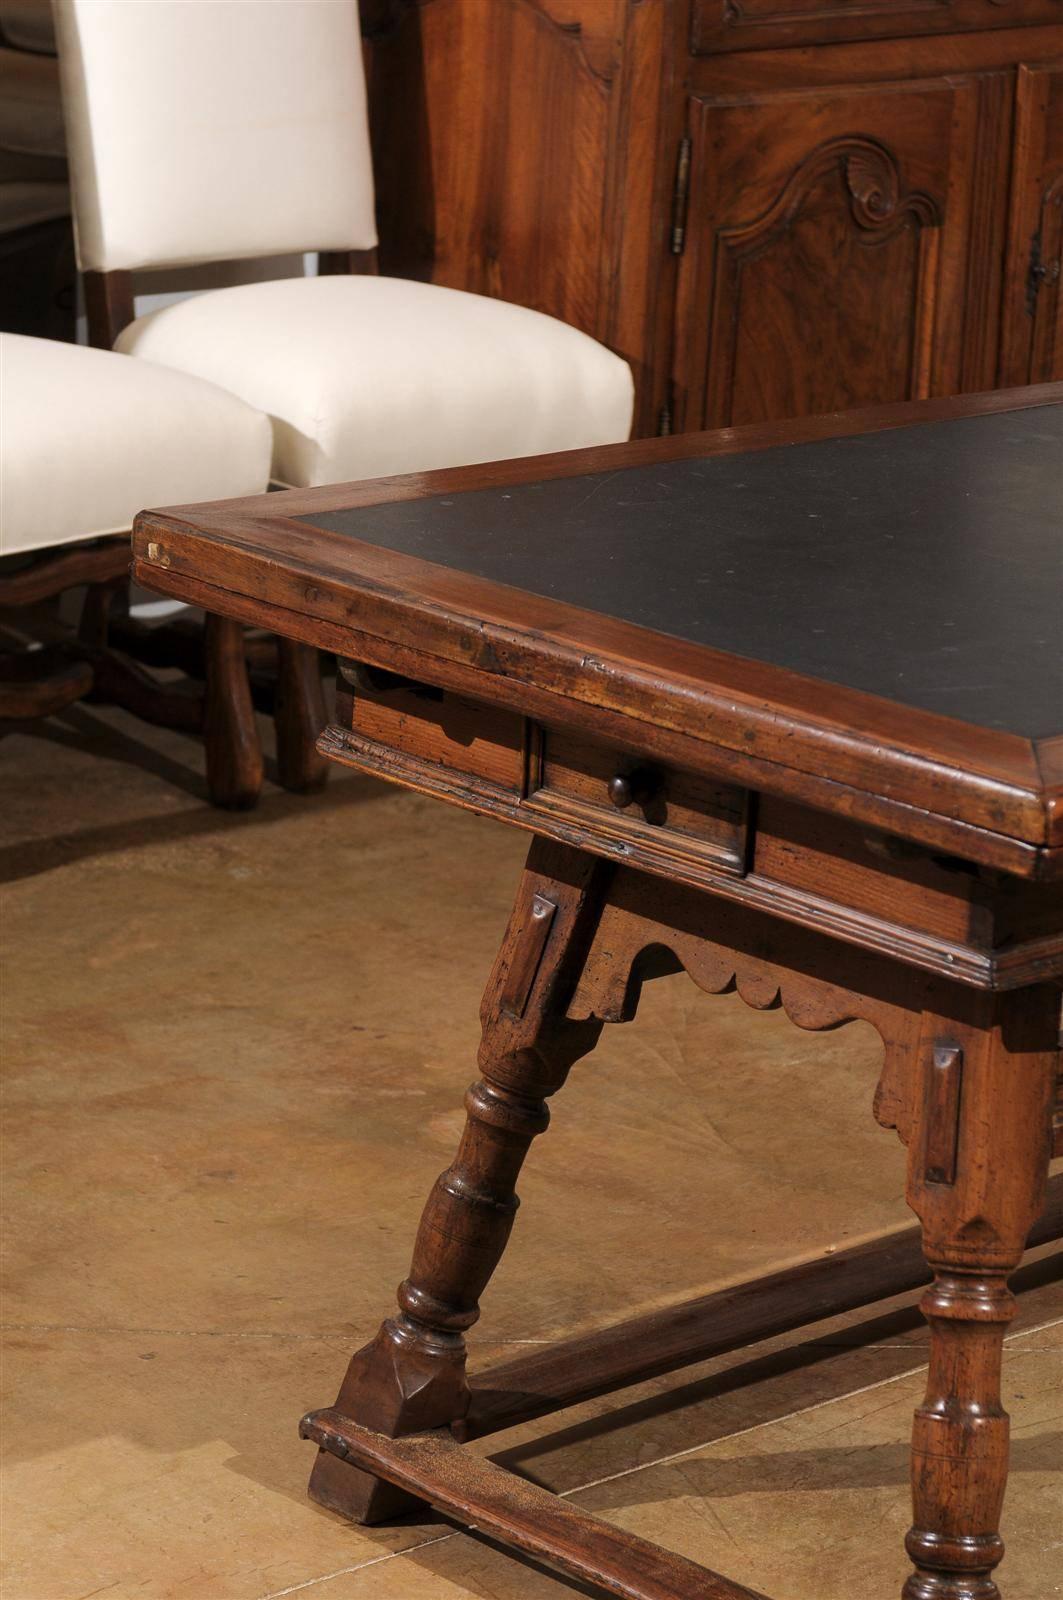 19th Century Swiss Wooden Draw-Leaf Extension Dining Table with Inset Slate Top, circa 1820